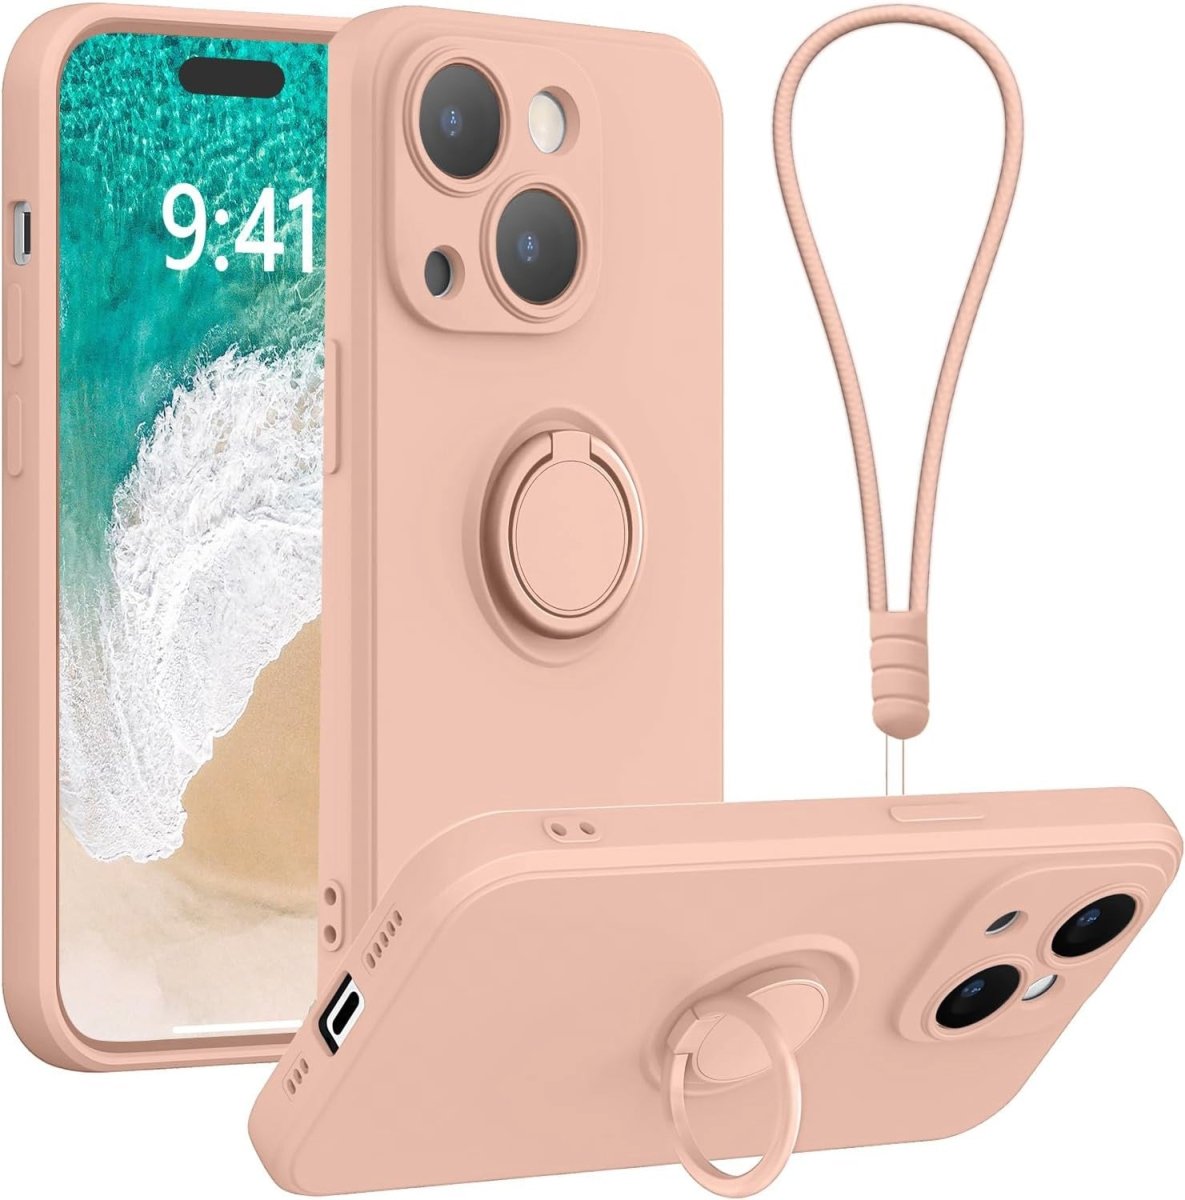 Dusky Pink Shockproof Silicone Case For iPhone With Ring And Lanyard  Dusky Pink iPhone 11 Accessories Gifts UK